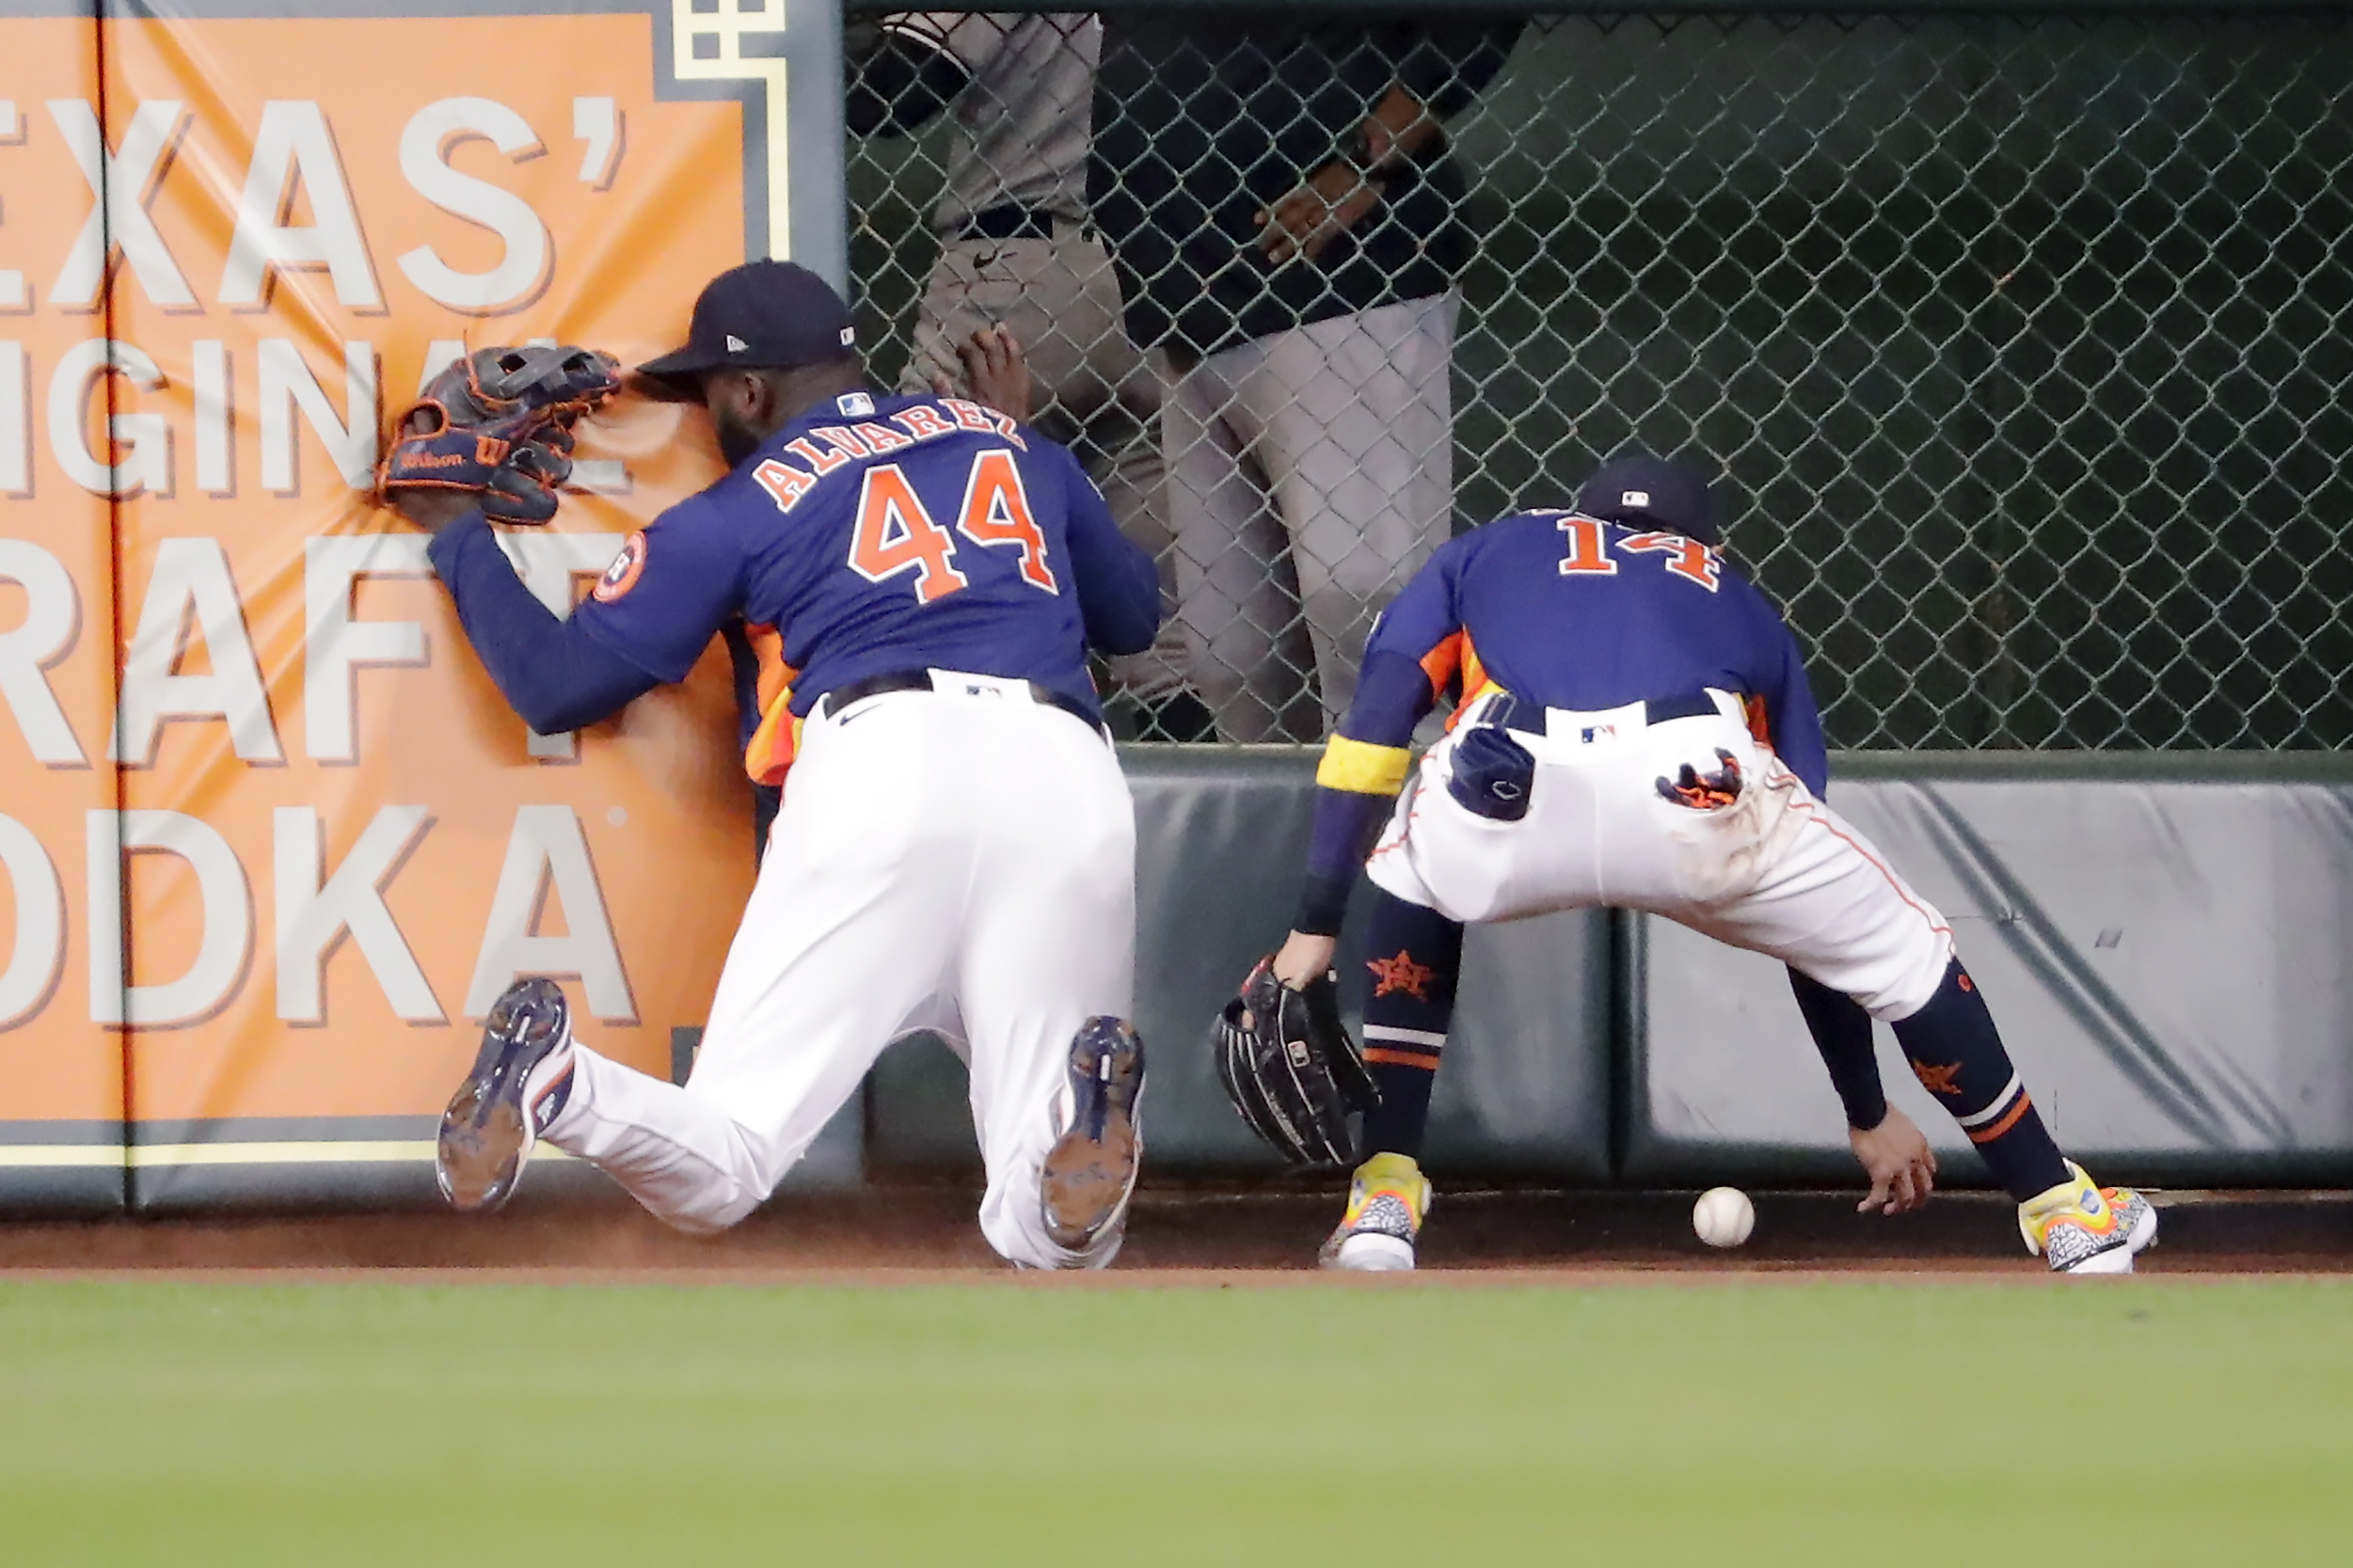 Astros swept by Yankees, tied for 2nd in AL West with Rangers prior